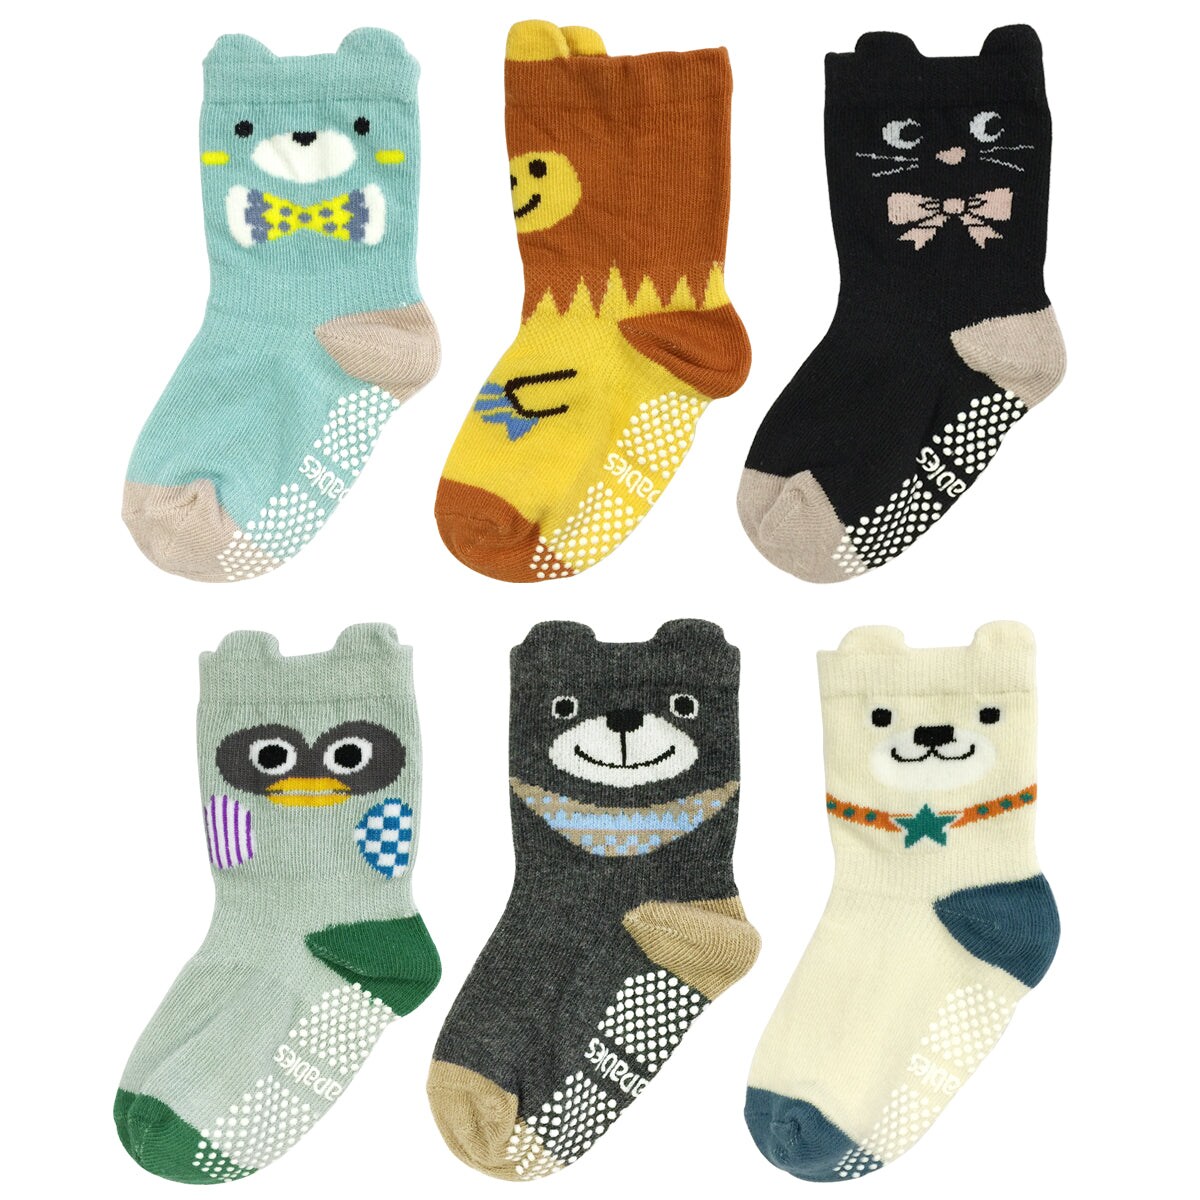 Wrapables Peek A Boo Animal Non-Skid Toddler Socks (Set of 6), Owl and Lion Large